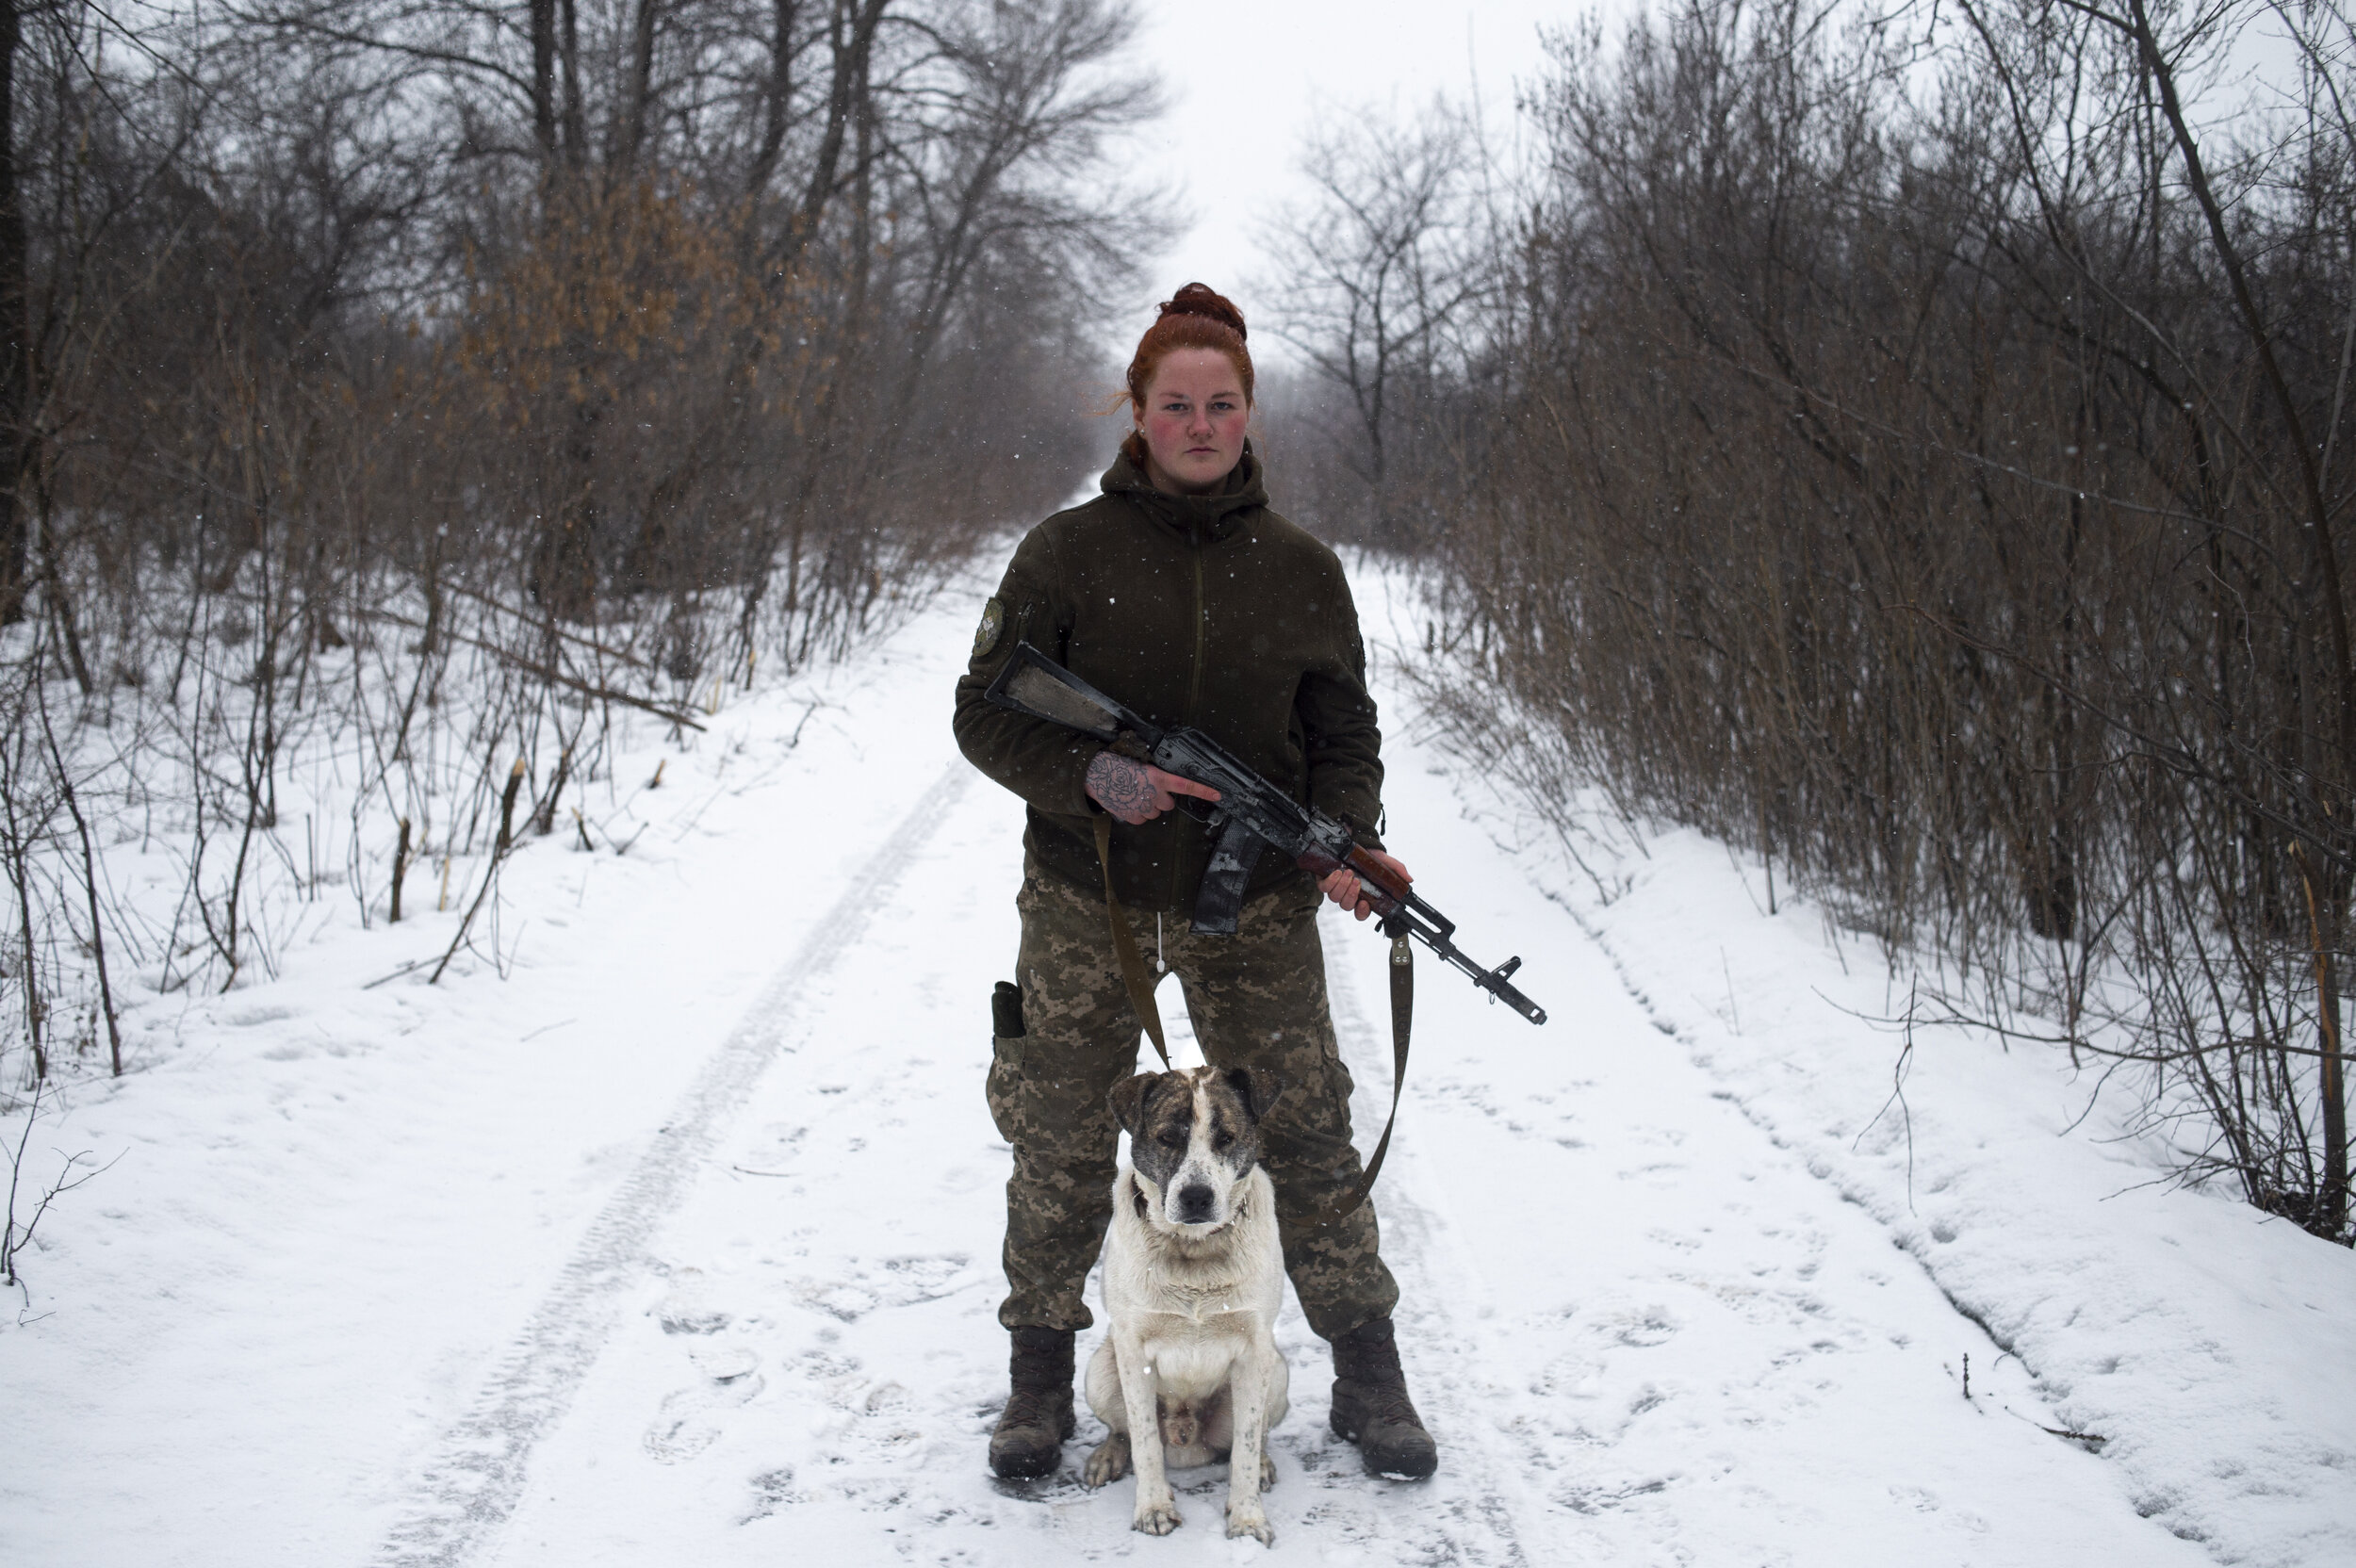  Katya Nalobina, a Ukrainian soldier in the 54th Mechanized Rifle Brigade, and her adopted dog Ser’Oga pose for a portrait in Zolote-4 near ‘Point Zero’ on February 25, 2019. Zolote-4 and ‘Point Zero’ as it is called by soldiers, is one of the most d